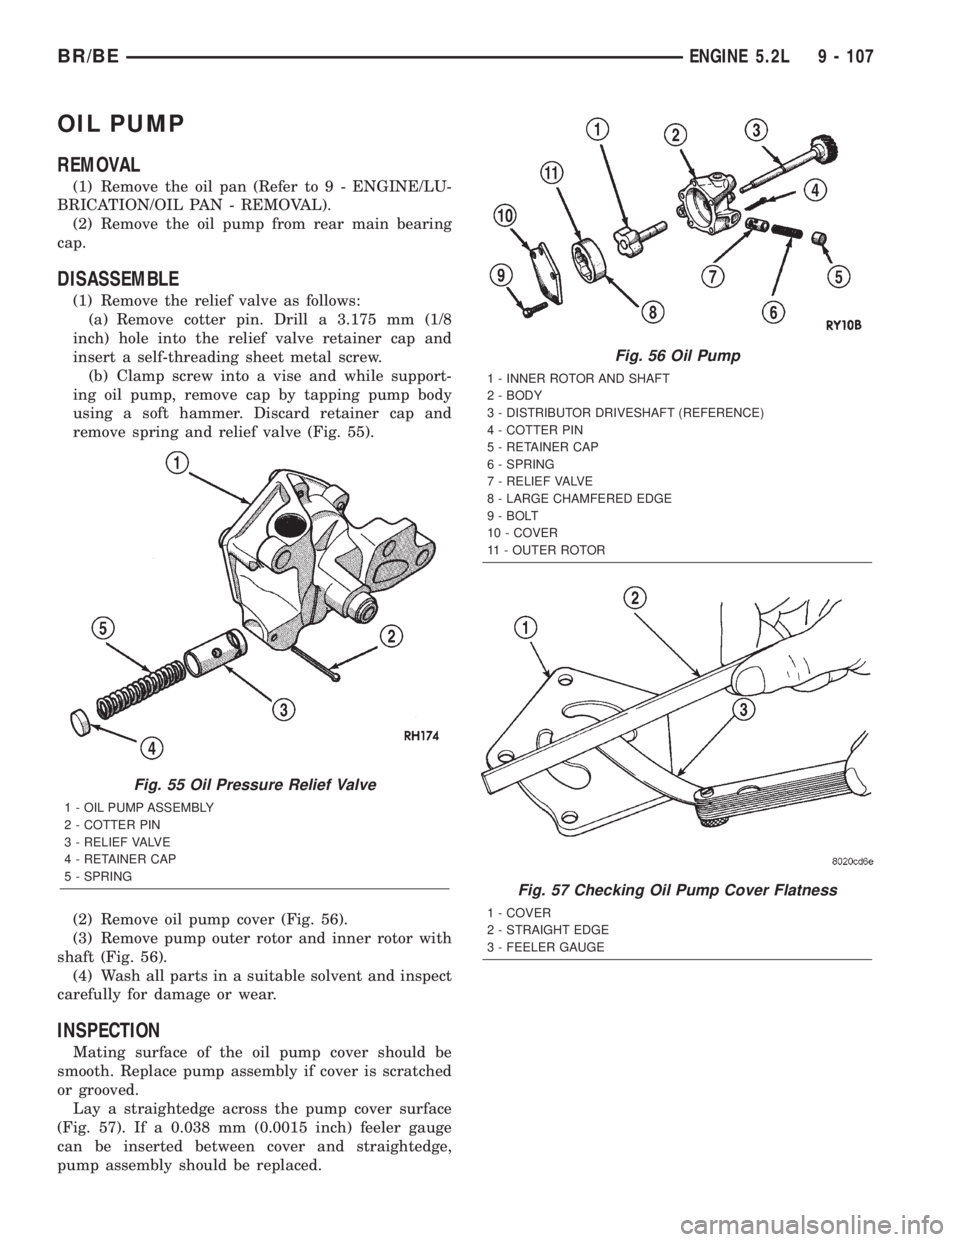 DODGE RAM 2001  Service Repair Manual OIL PUMP
REMOVAL
(1) Remove the oil pan (Refer to 9 - ENGINE/LU-
BRICATION/OIL PAN - REMOVAL).
(2) Remove the oil pump from rear main bearing
cap.
DISASSEMBLE
(1) Remove the relief valve as follows:
(